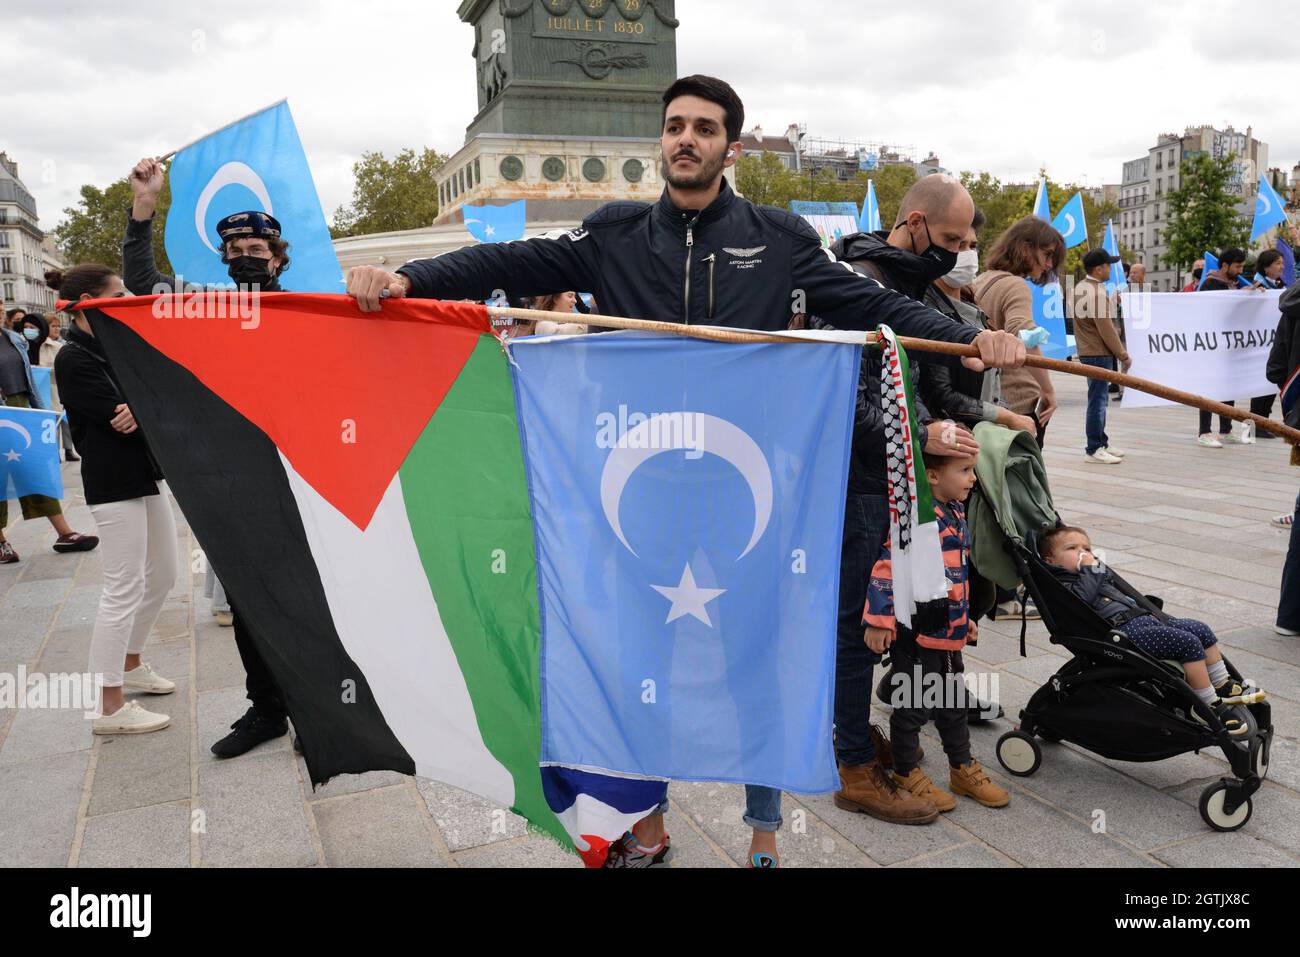 Demonstration against the genocide of the Uyghur people in China. Several hundred people, including several MPs, march from the Place de la Bastille Stock Photo